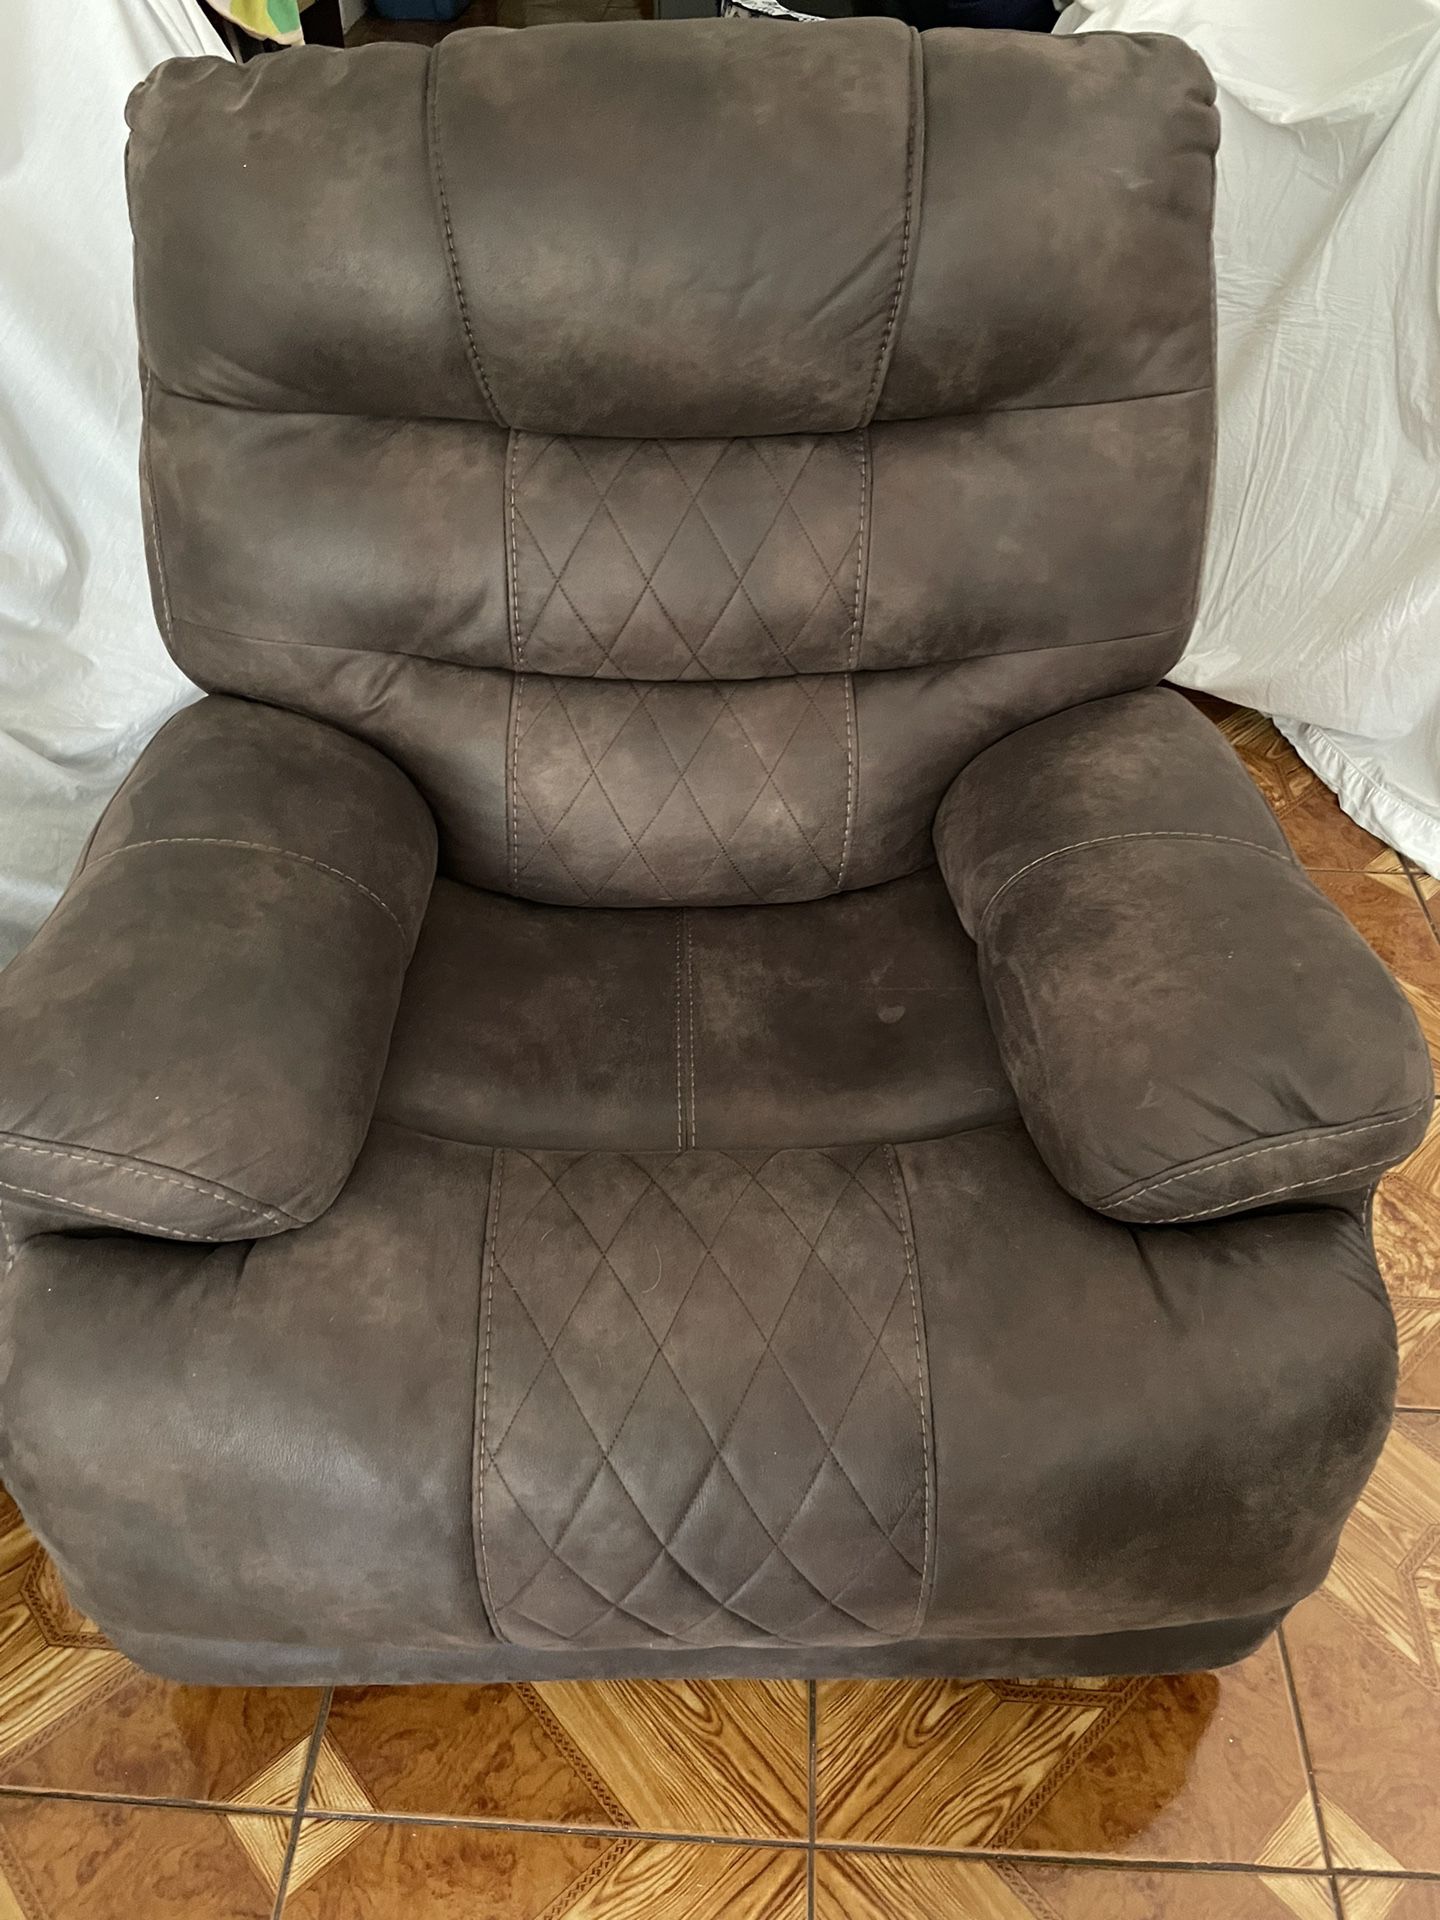 Recliner Chair & Recliner Sofa OFFERS WELCOME LIKE NEW